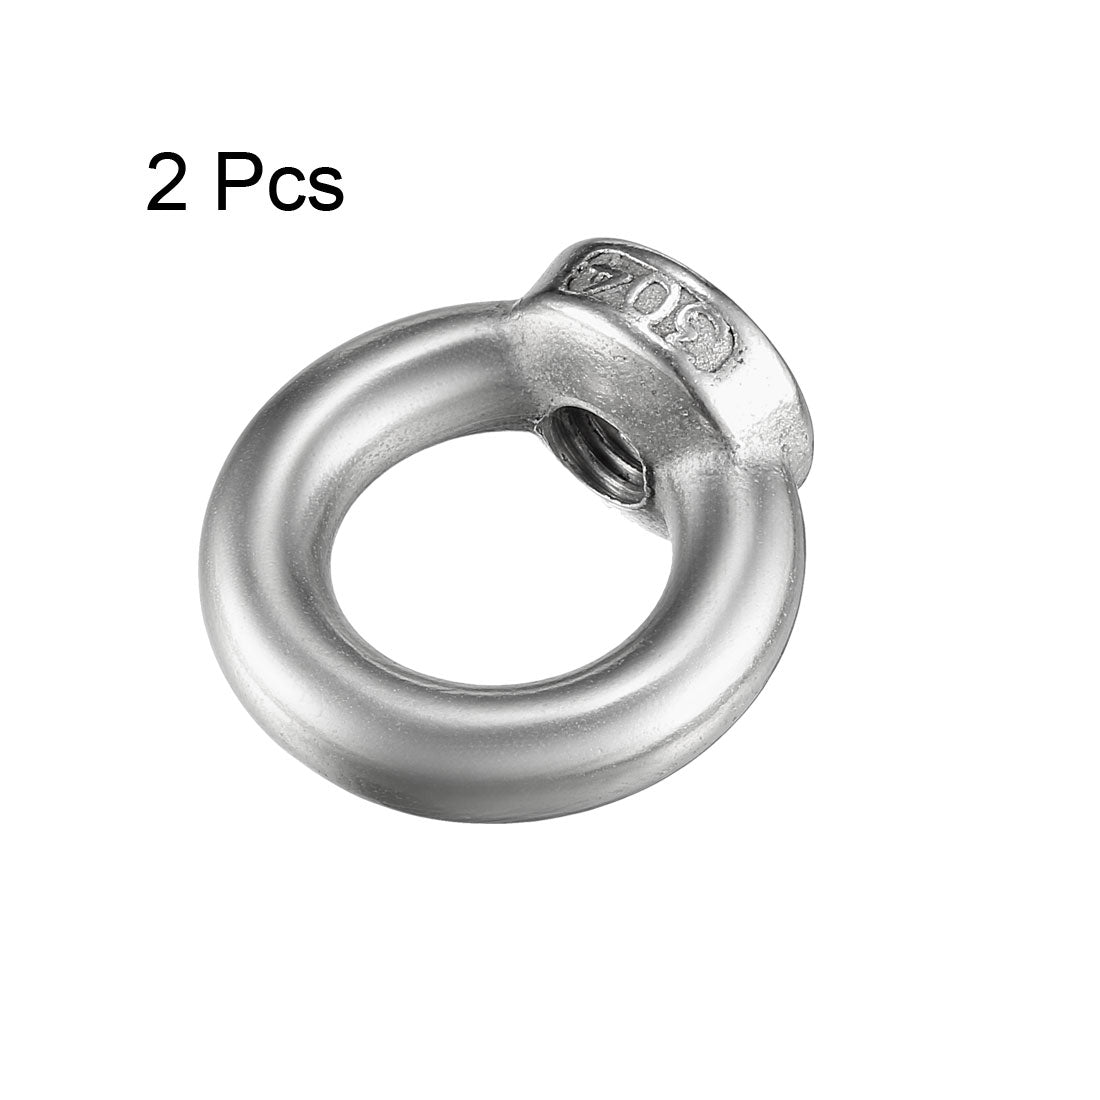 uxcell Uxcell M8 Female Thread 304 Stainless Steel Lifting Eye Nuts Ring 2pcs